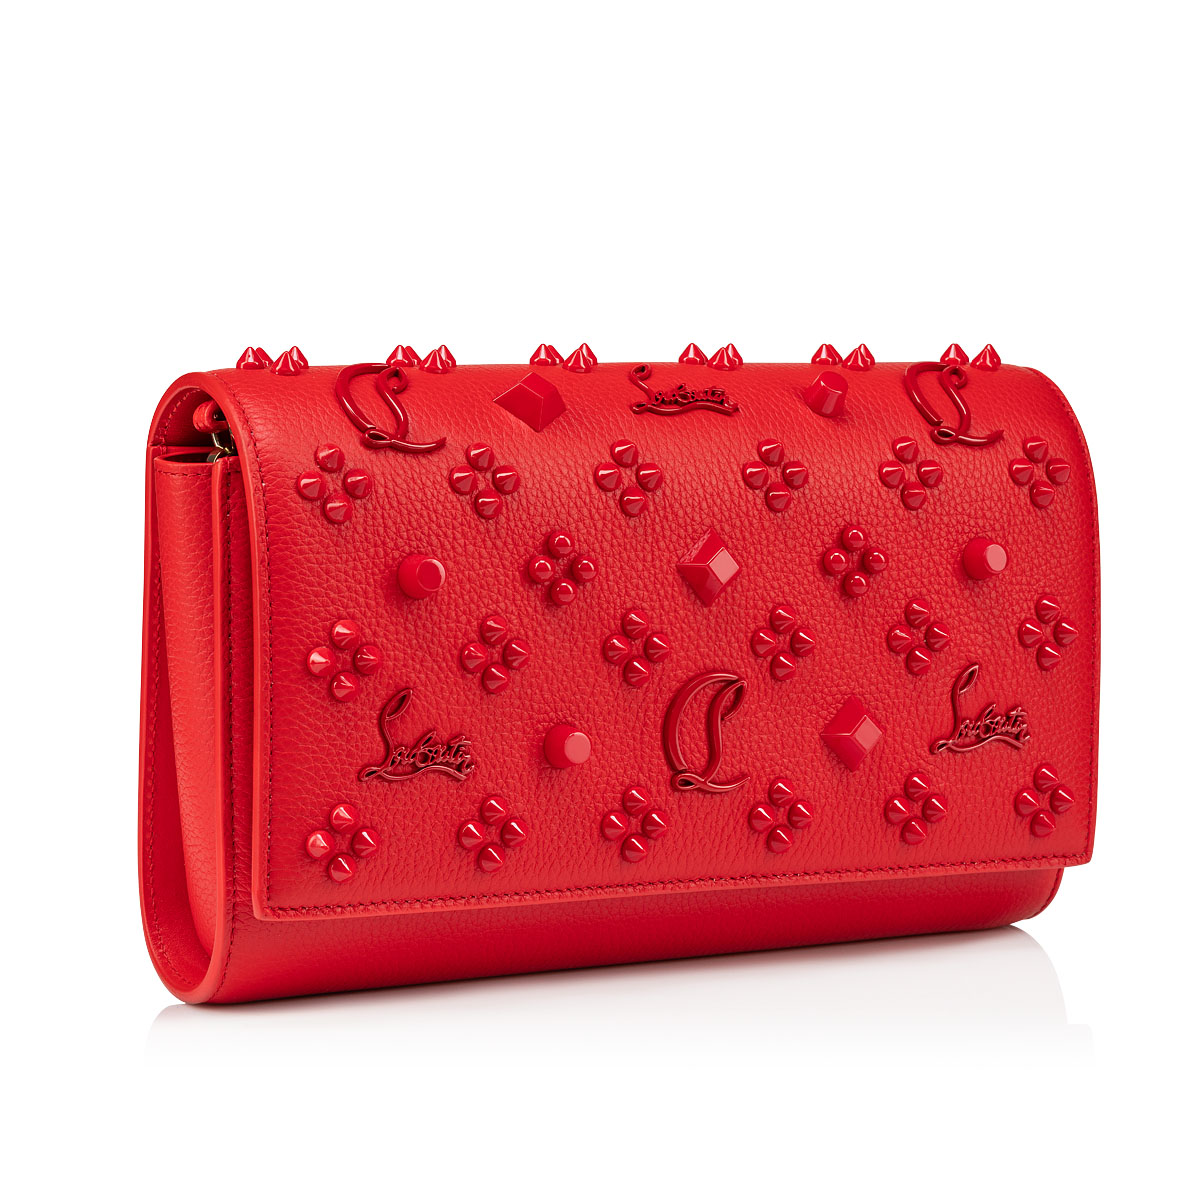 Paloma - Clutch - Grained calf leather and spikes Loubinthesky 